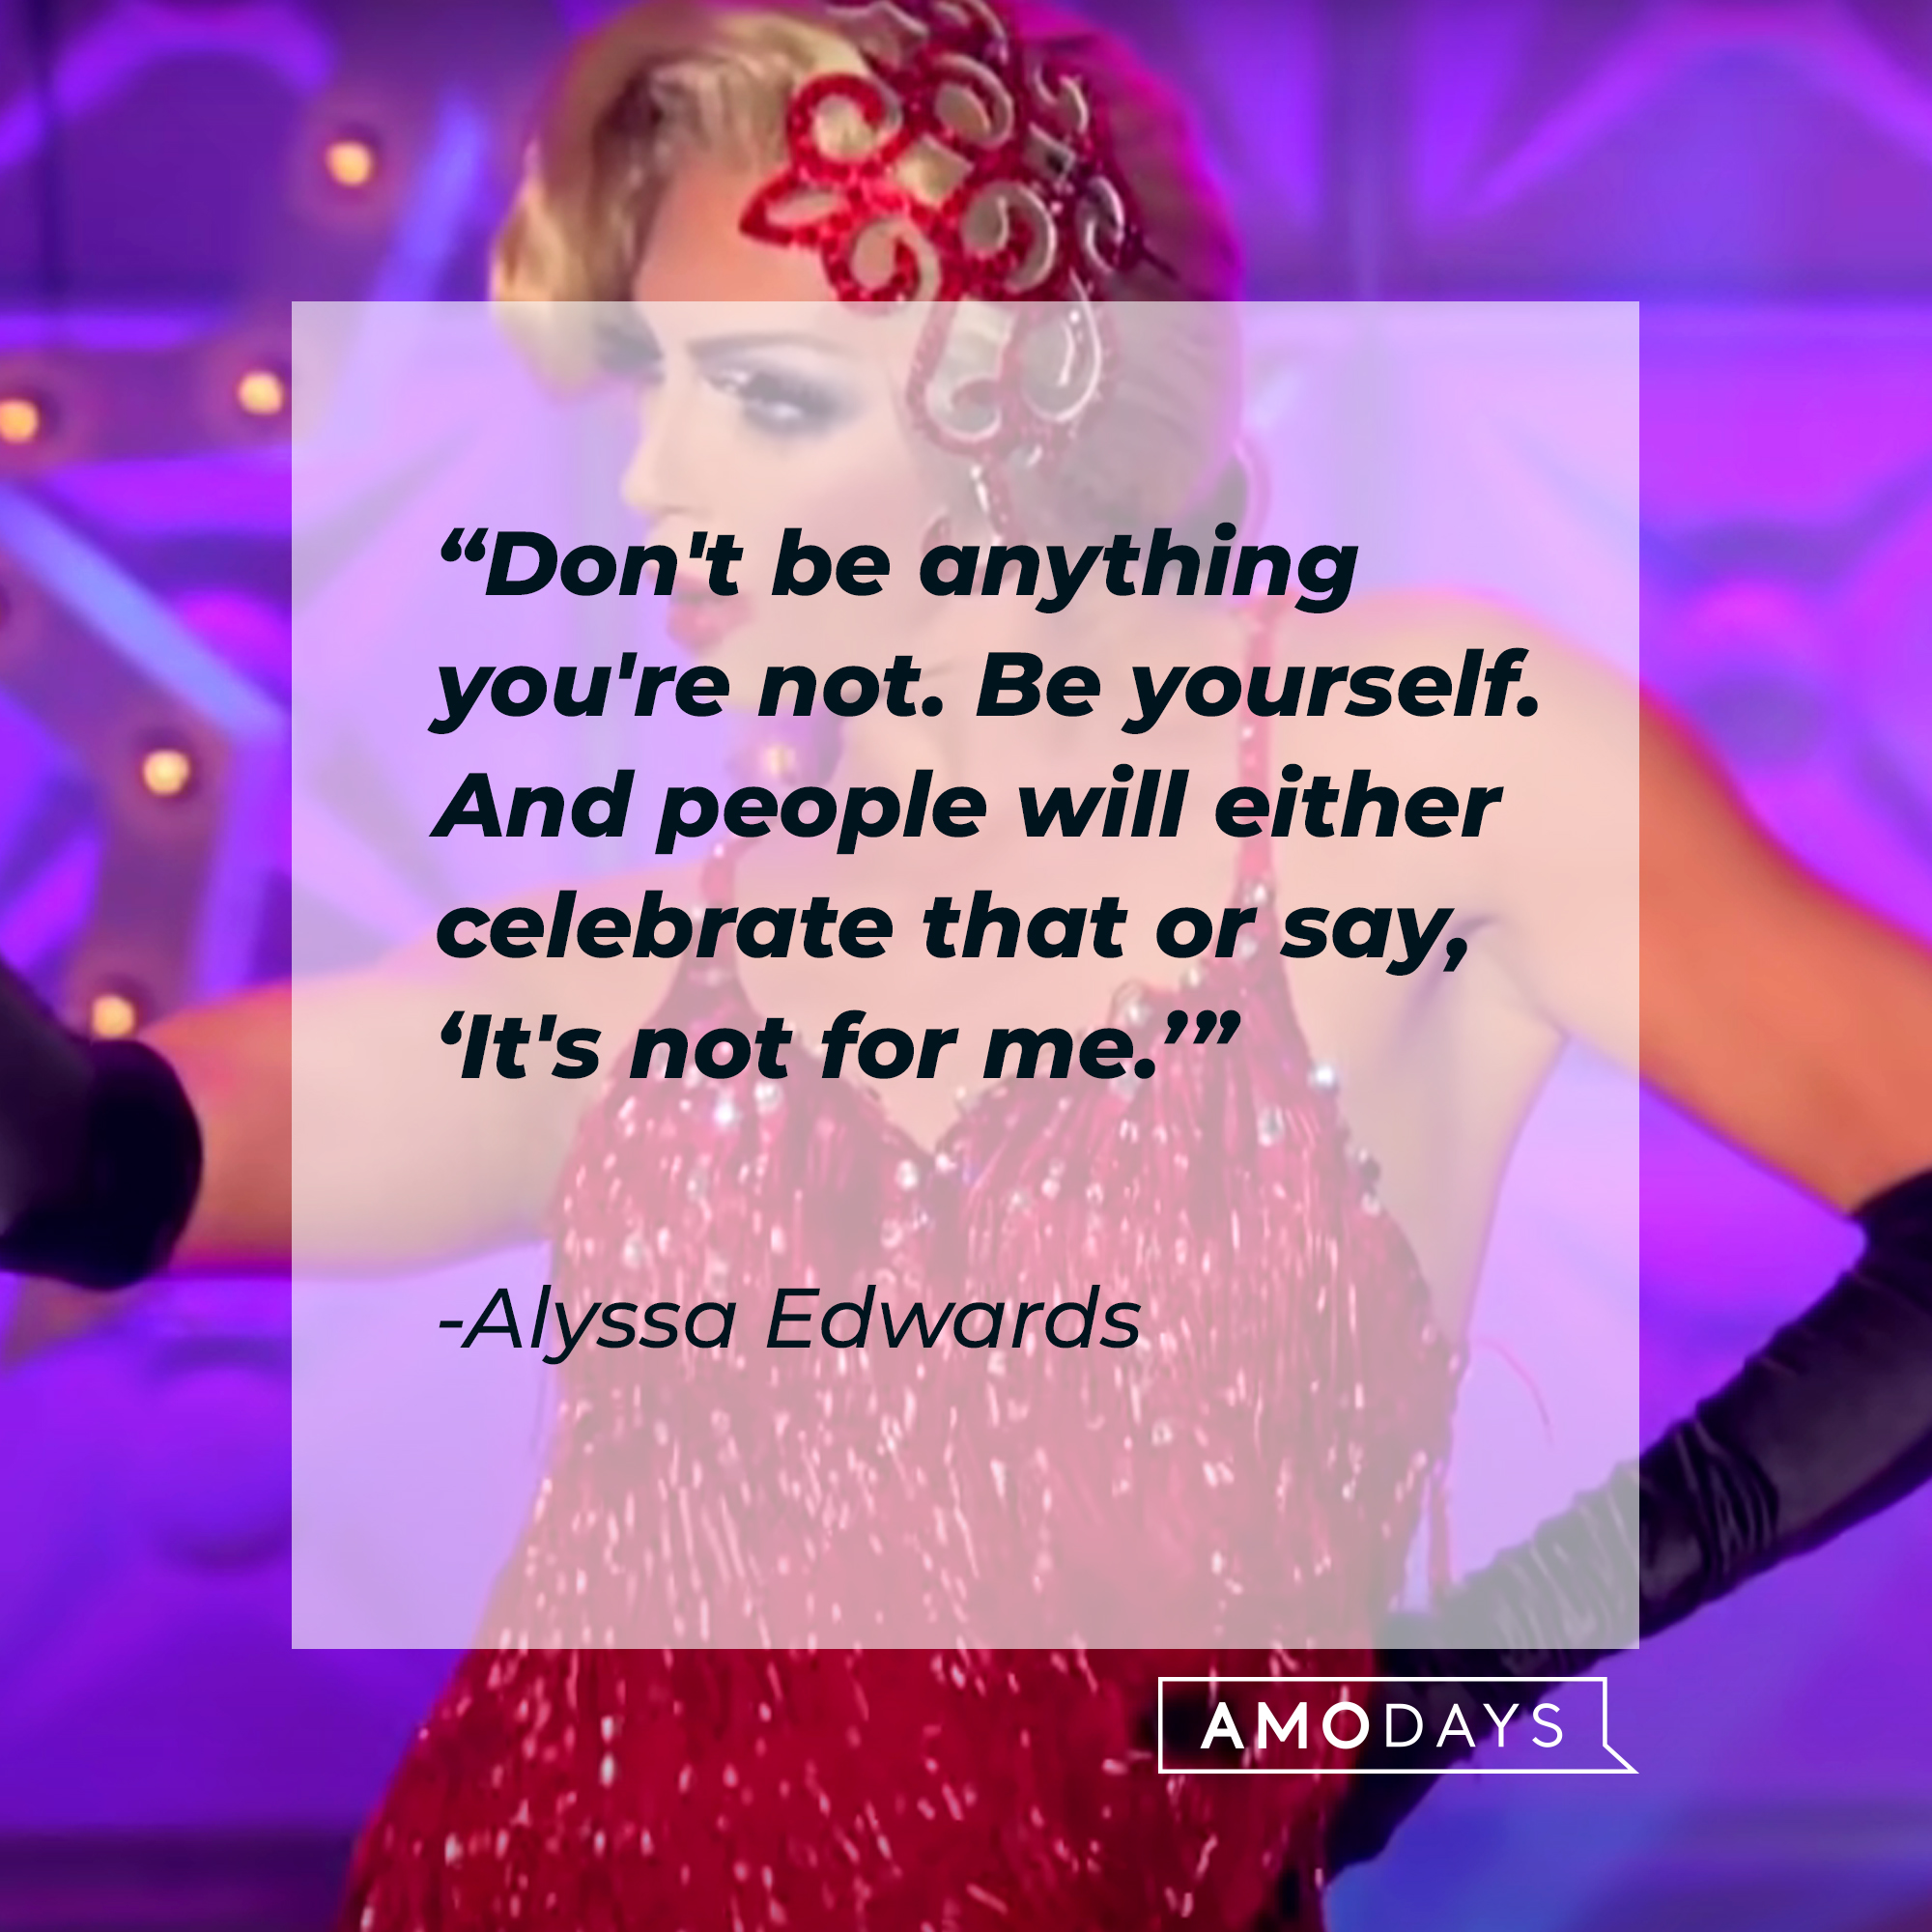 Alyssa Edwards's quote: “Don't be anything you're not. Be yourself. And people will either celebrate that or say, 'It's not for me.'" | Source: youtube.com/rupaulsdragrace